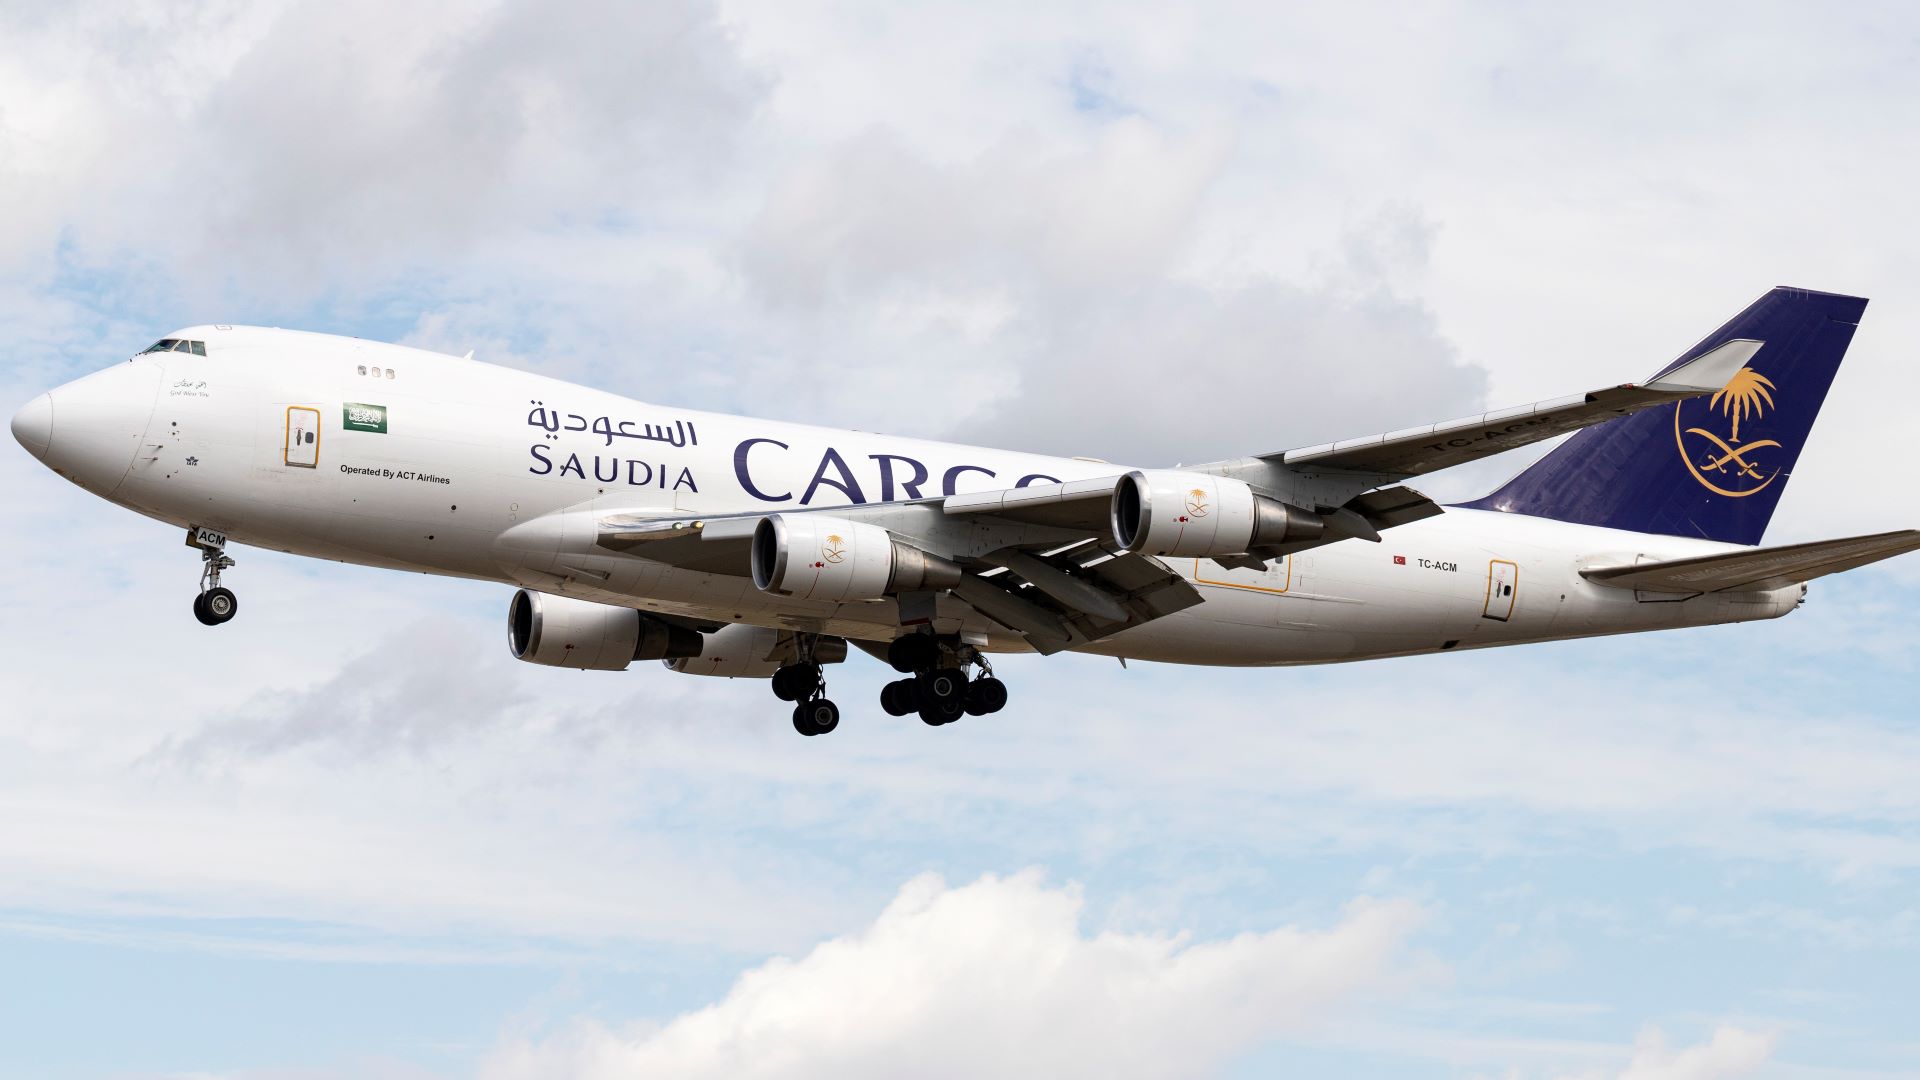 A white jumbo jet with teal green tail and Saudia Cargo on side comes in for landing with wheels down. View is looking up at plane in sky.